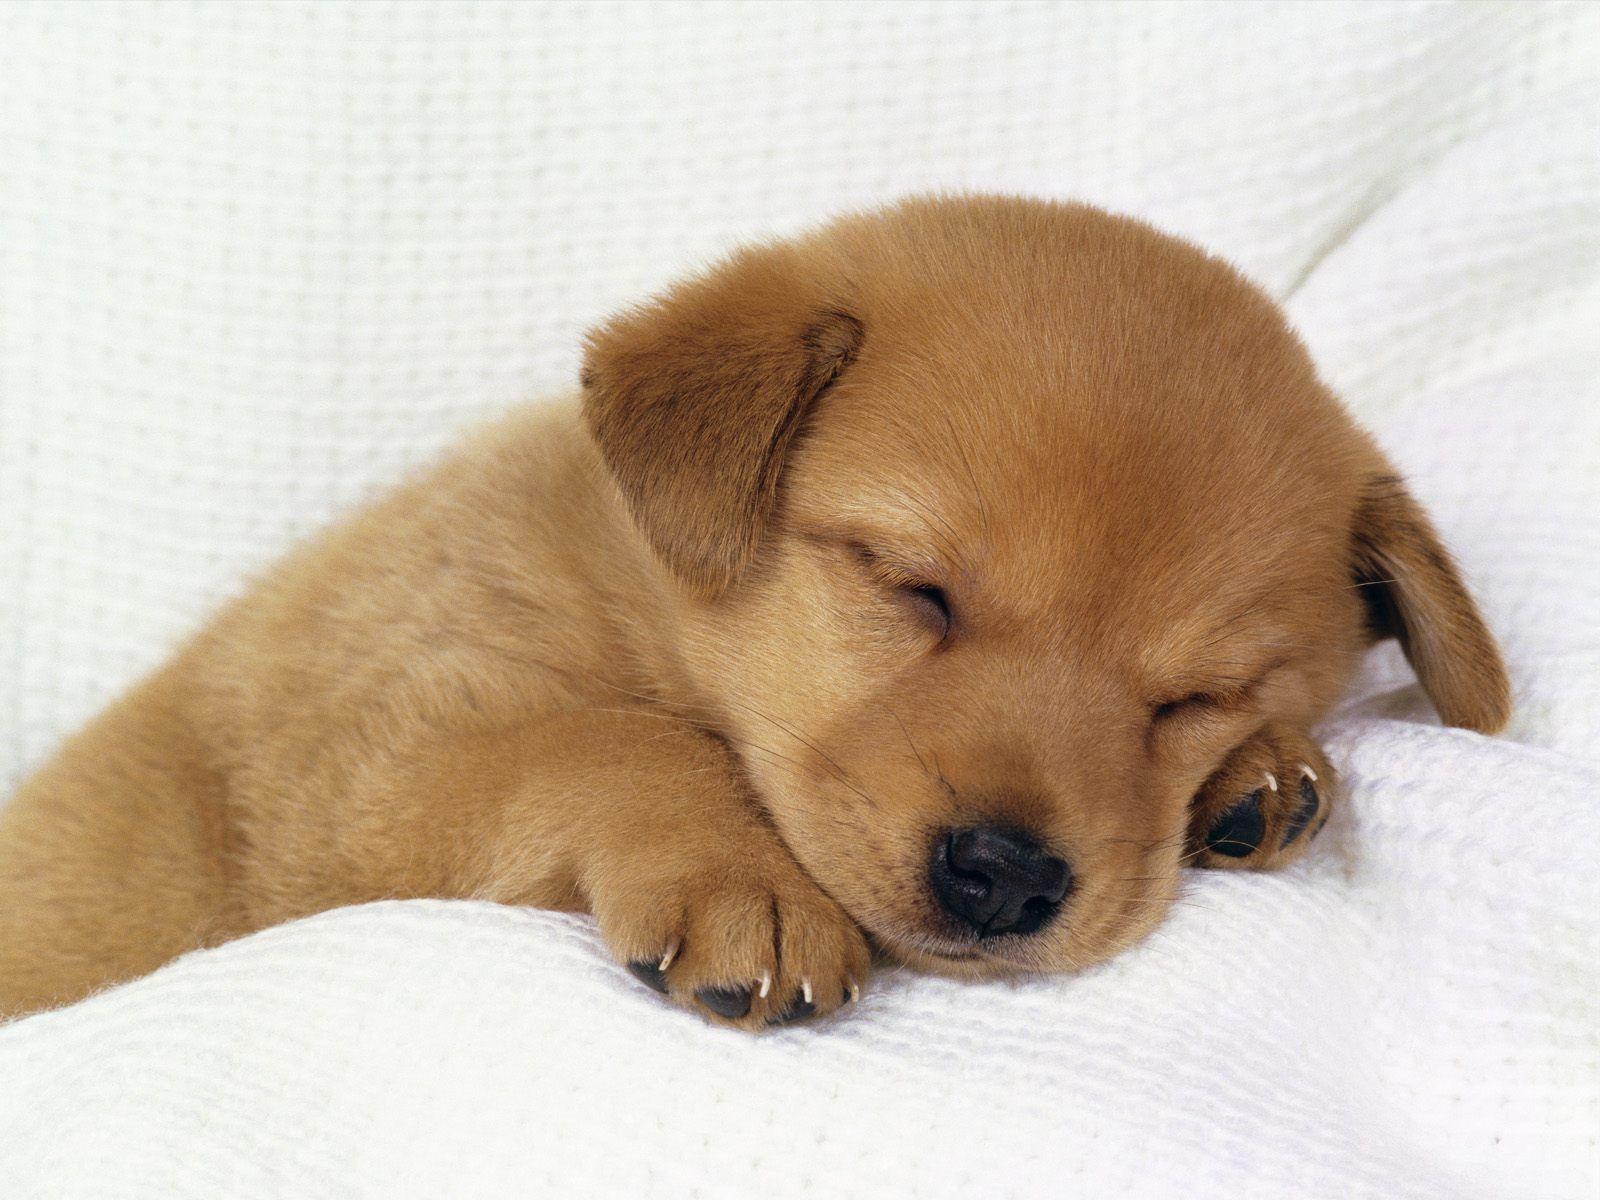 Cute Baby Dog Wallpaper Background. Baby animals picture